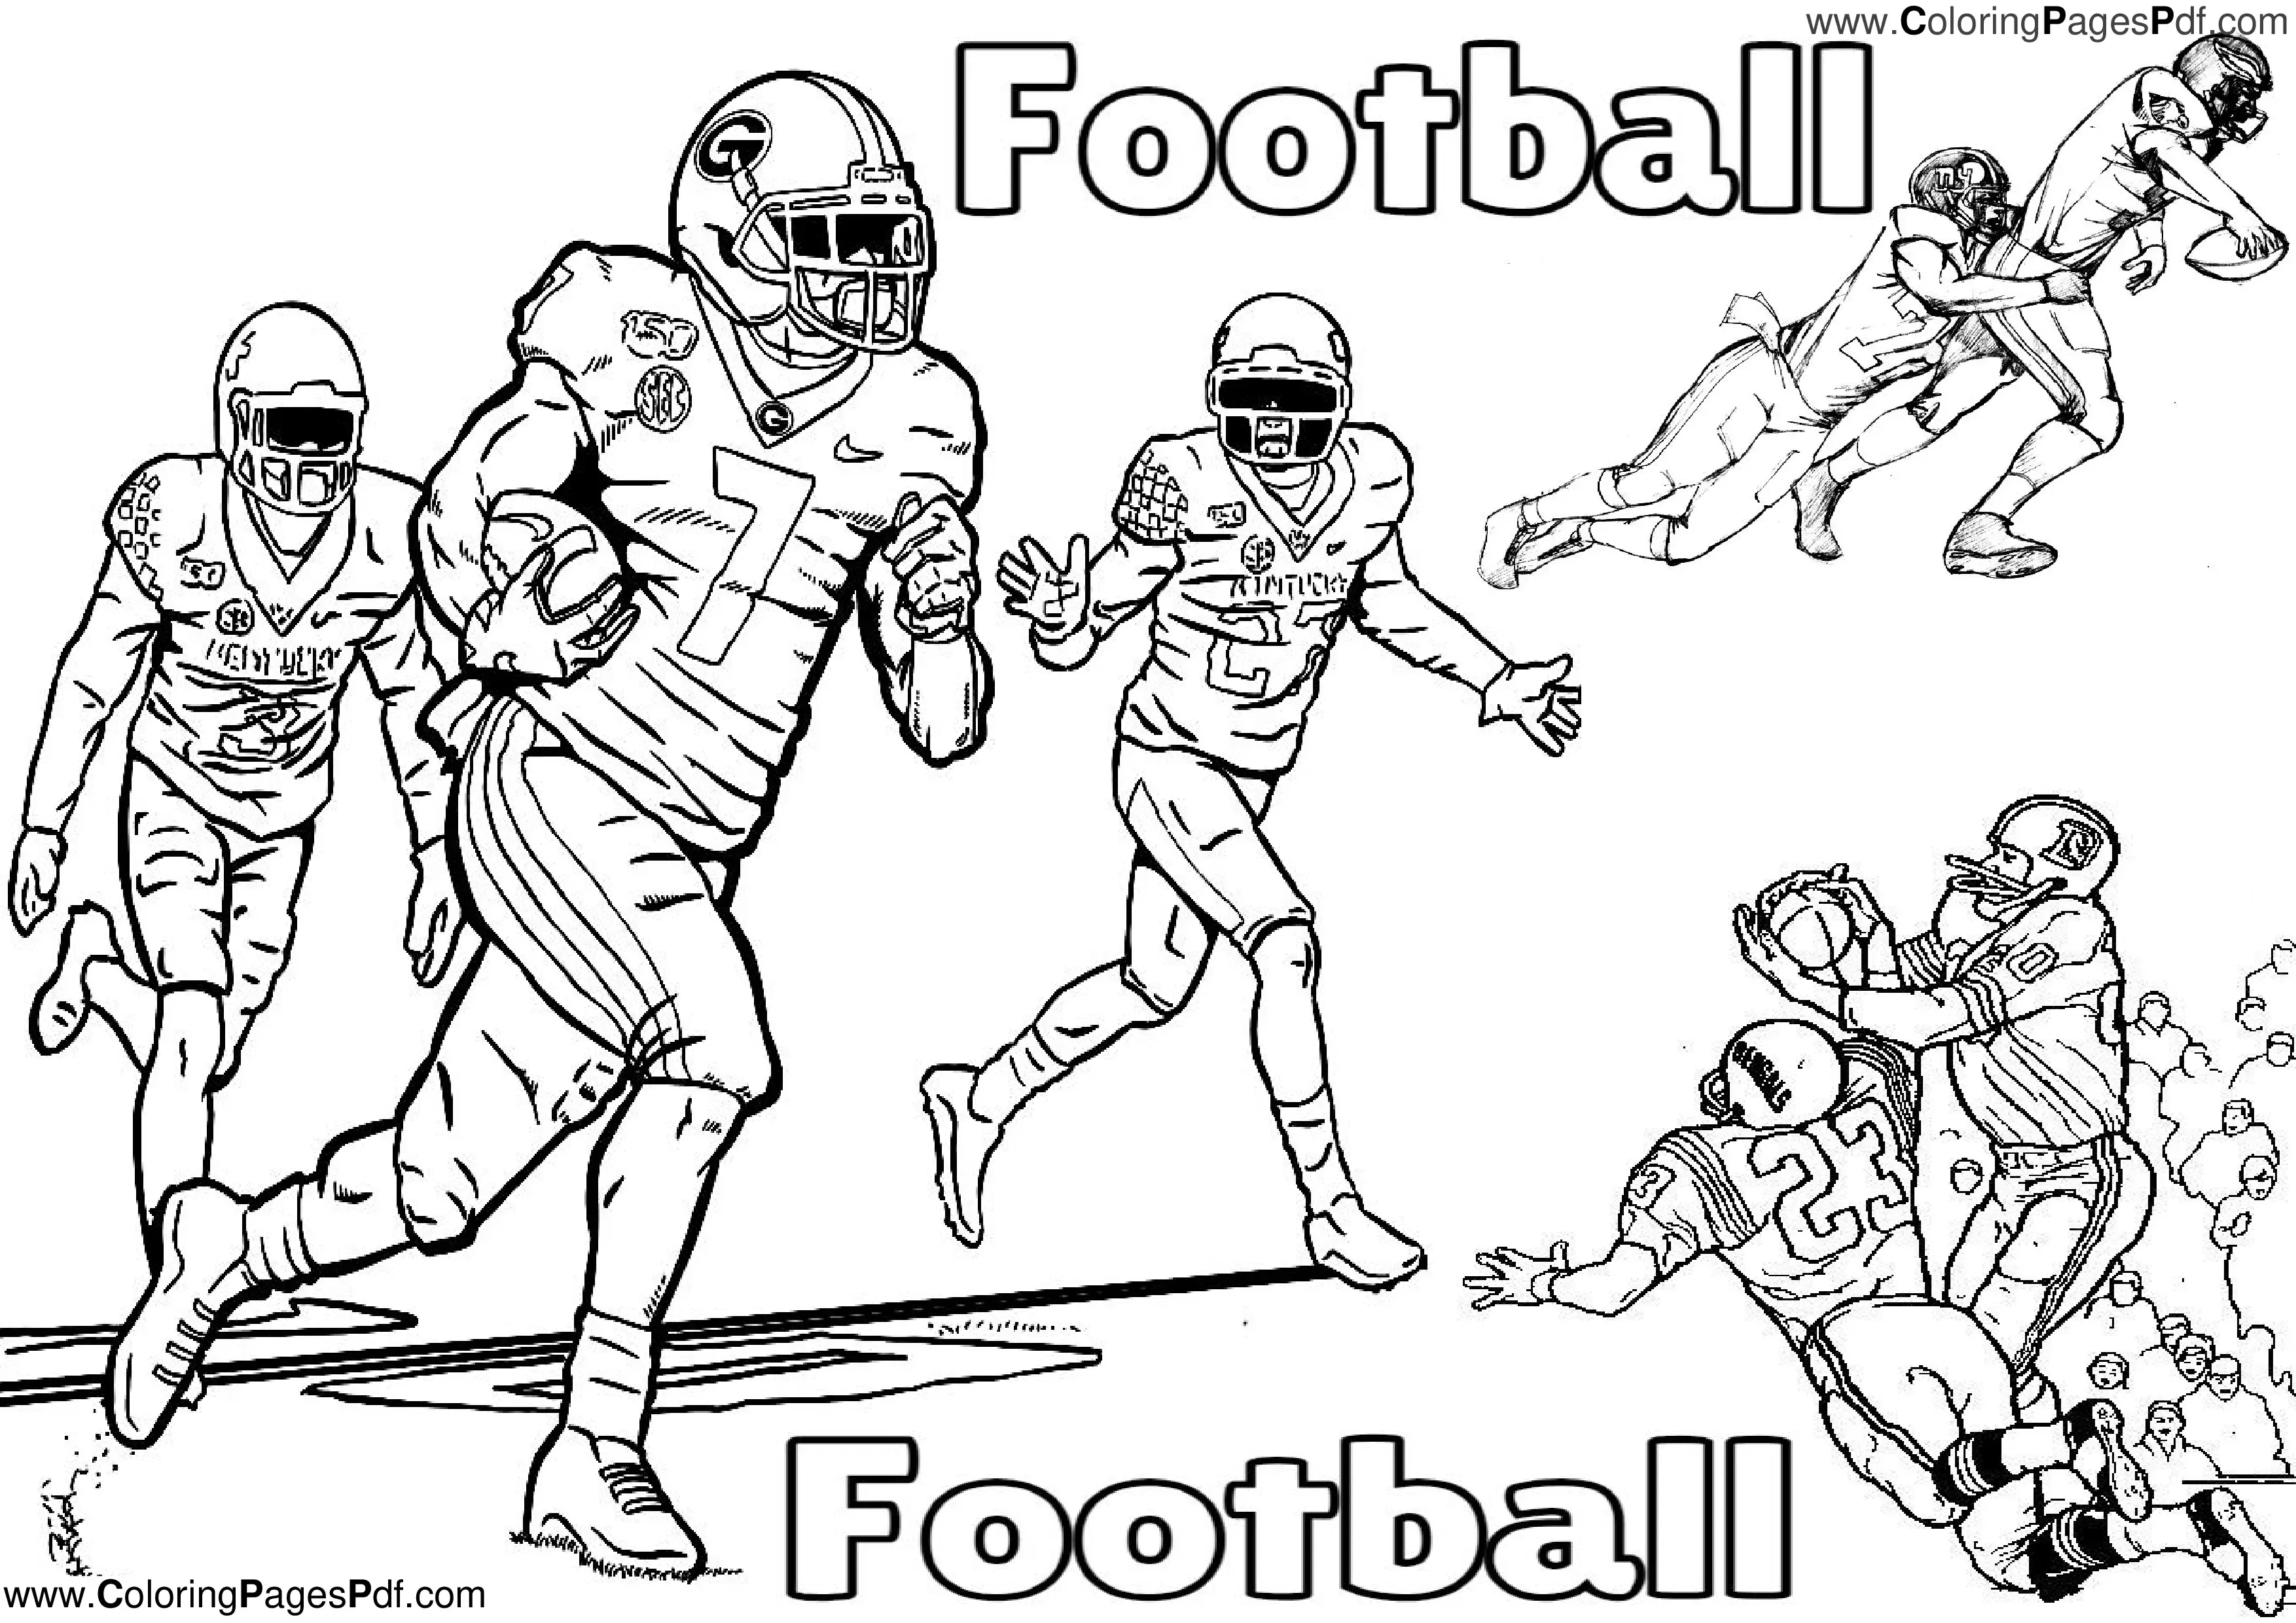 Cute Football coloring pages